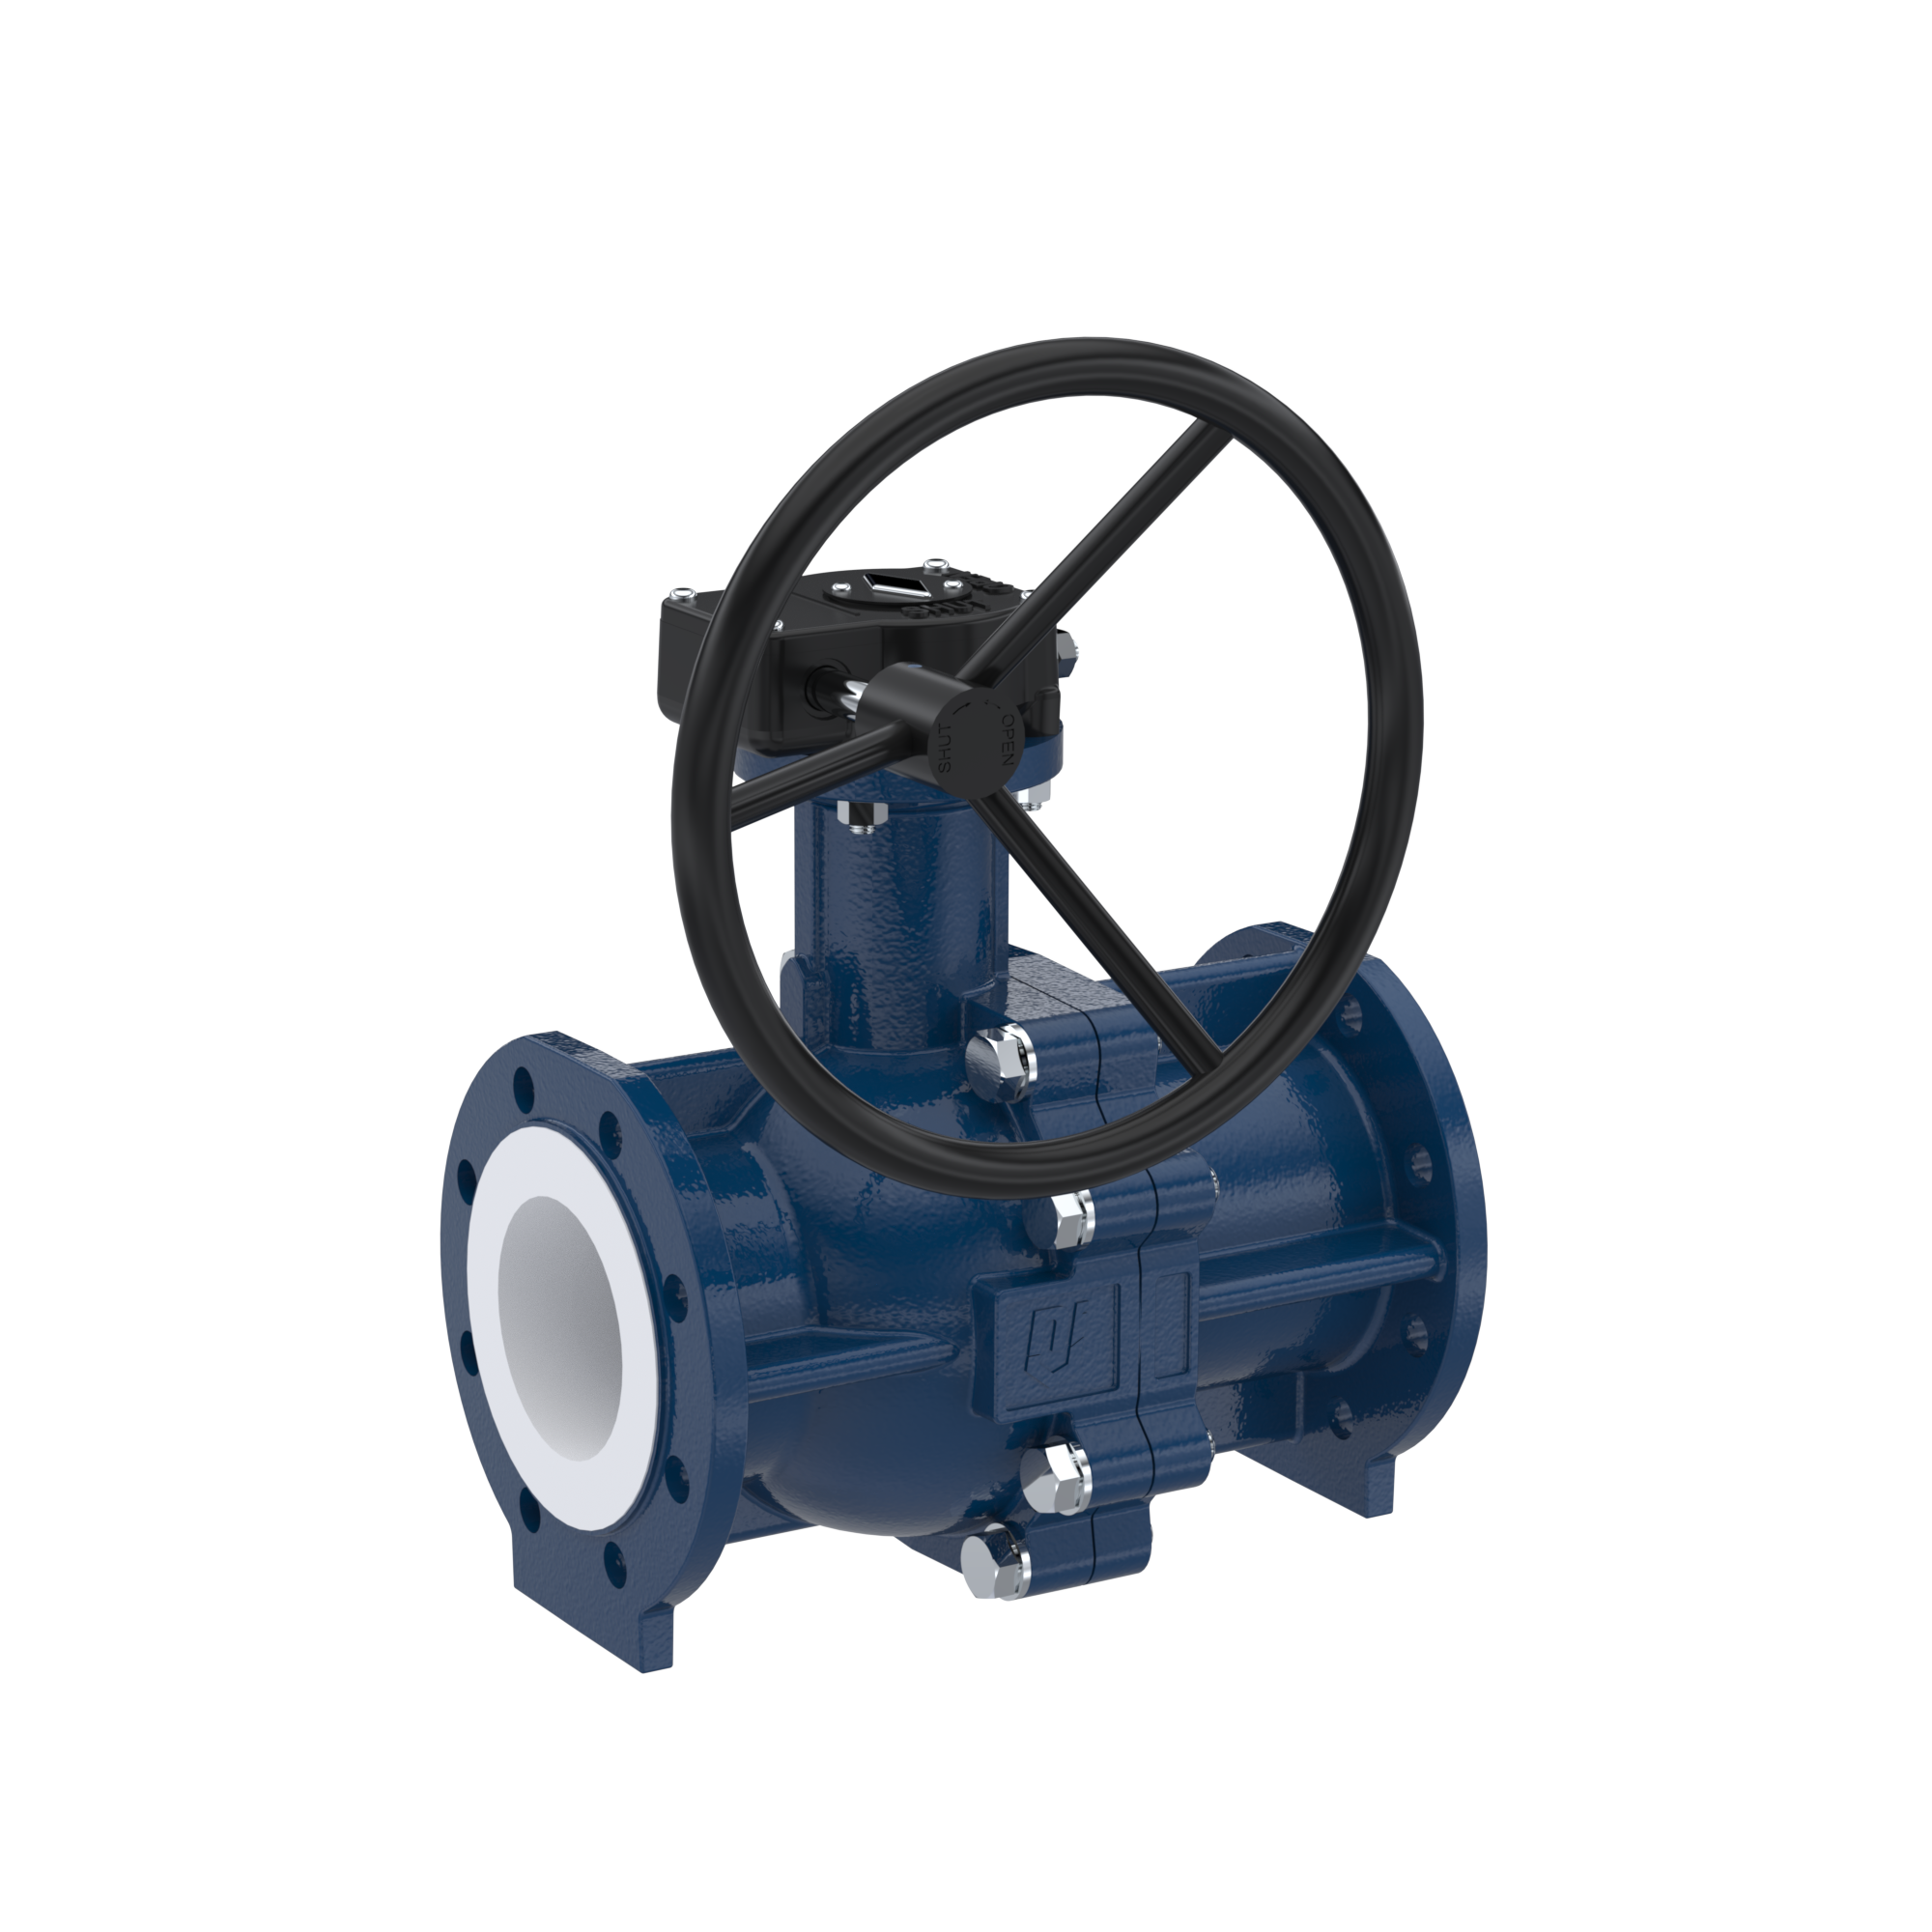 PFA-flange ball valve FK13 DN100 - 4" inch PN10/16 made of spheroidal graphite cast iron with worm gear